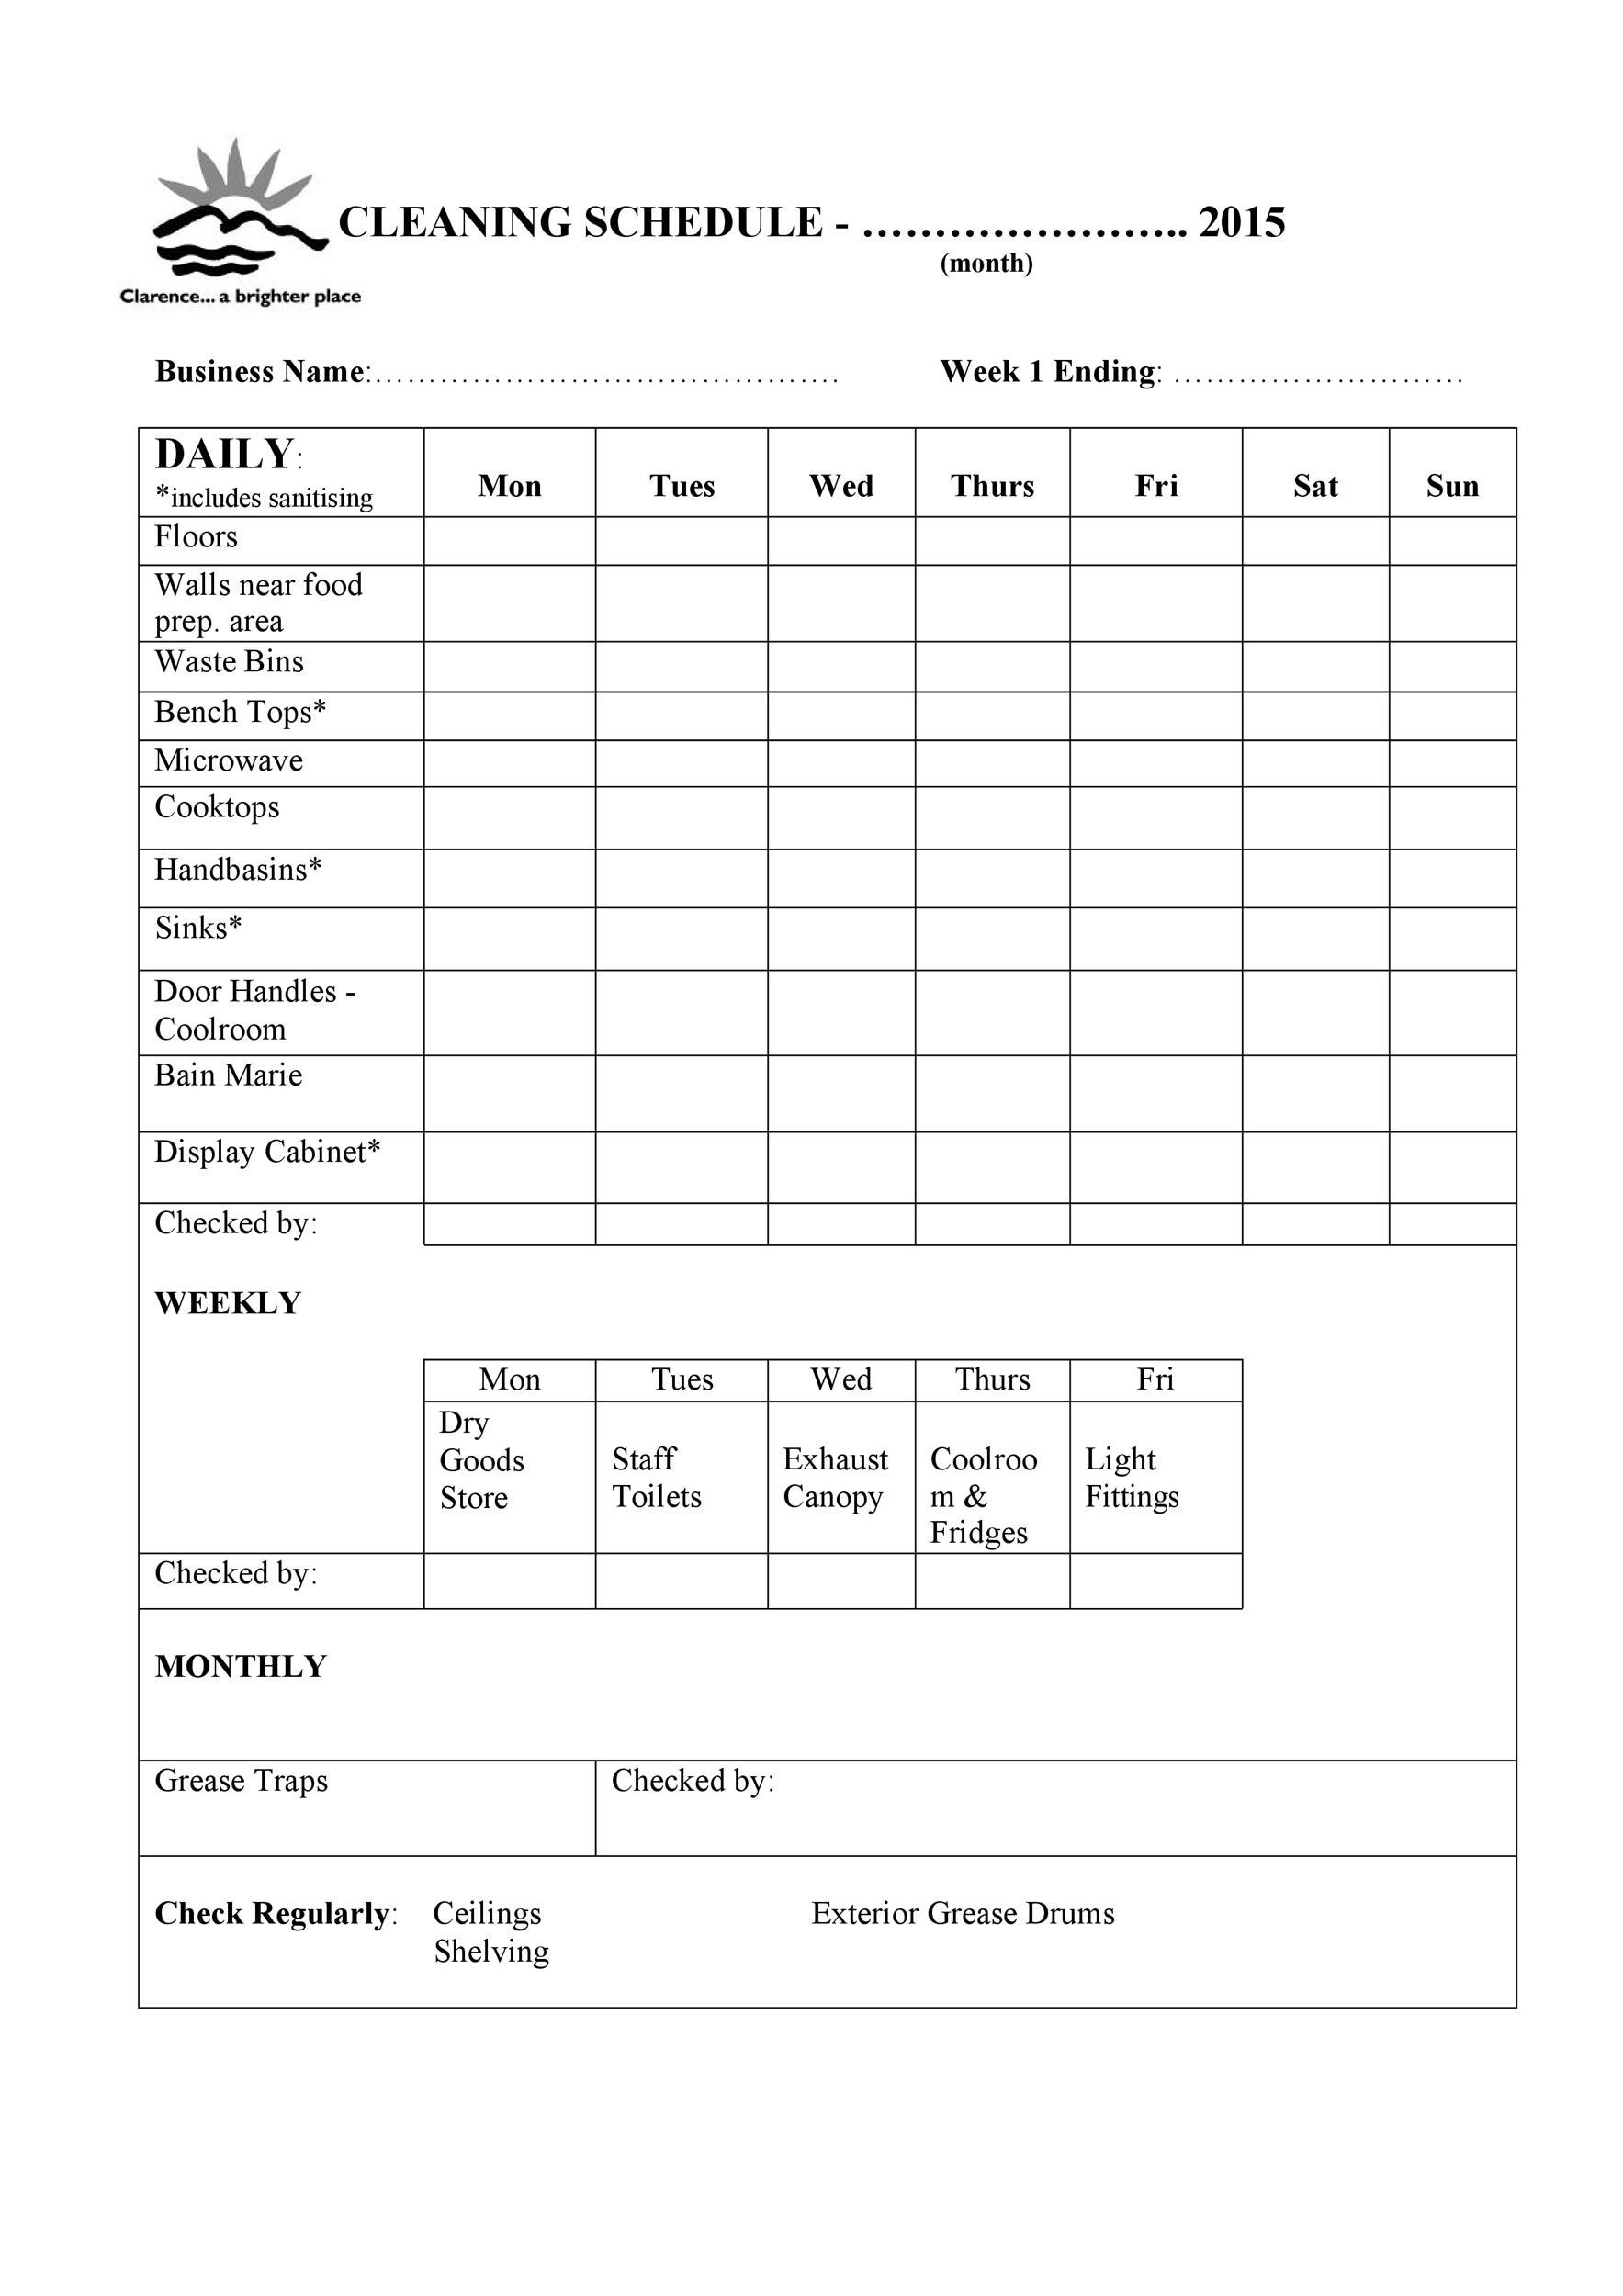 11 Printable House Cleaning Checklist Templates ᐅ TemplateLab Within Cleaning Services Checklist Template Regarding Cleaning Services Checklist Template